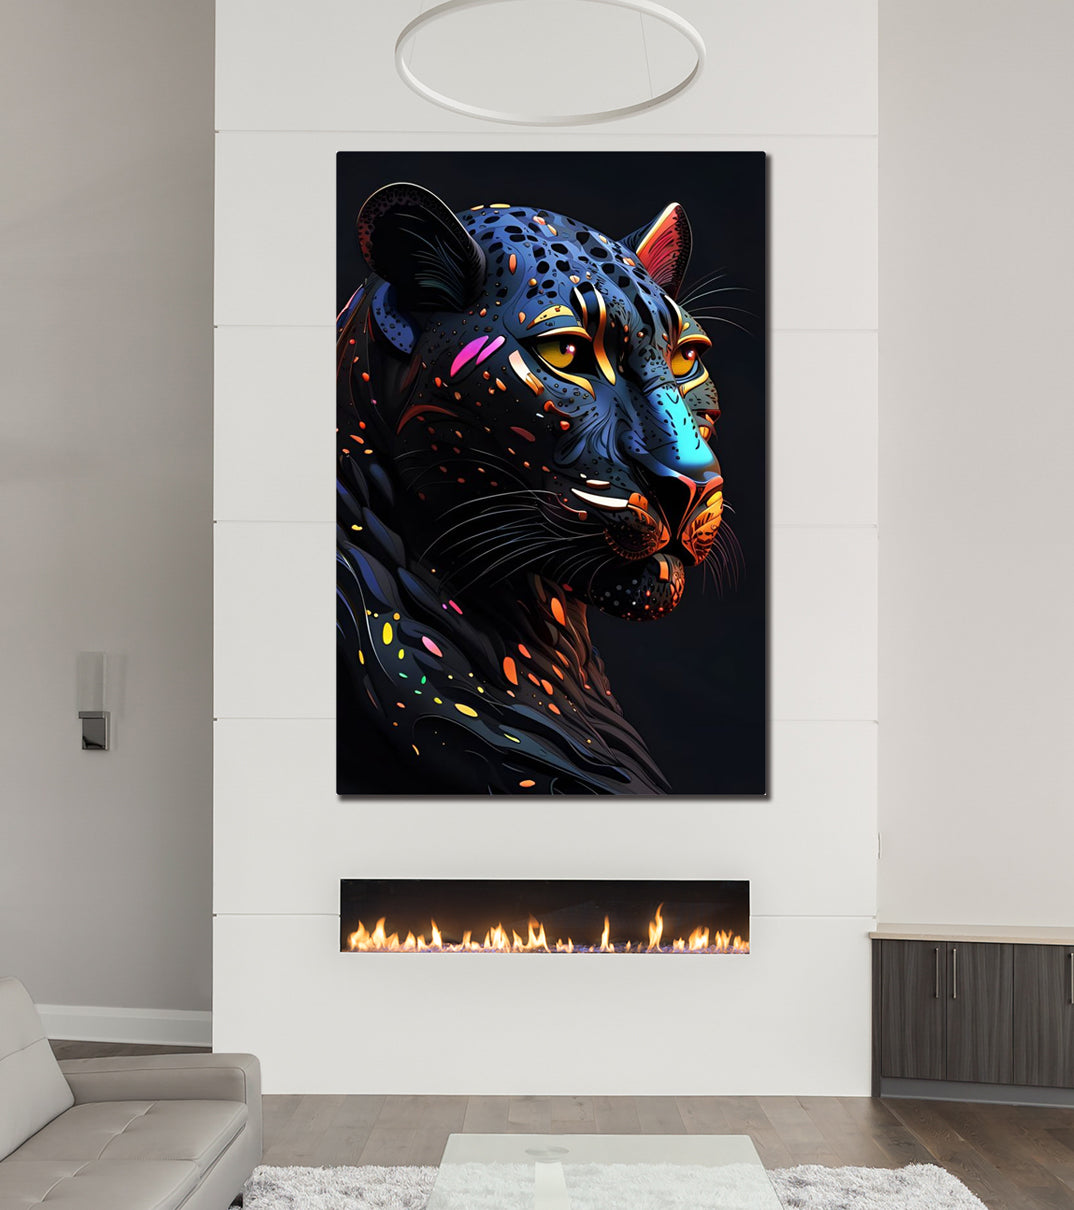 Colorful Futuristic Panther Head Printed on Eco-Friendly Recycled Aluminum hung above fireplace